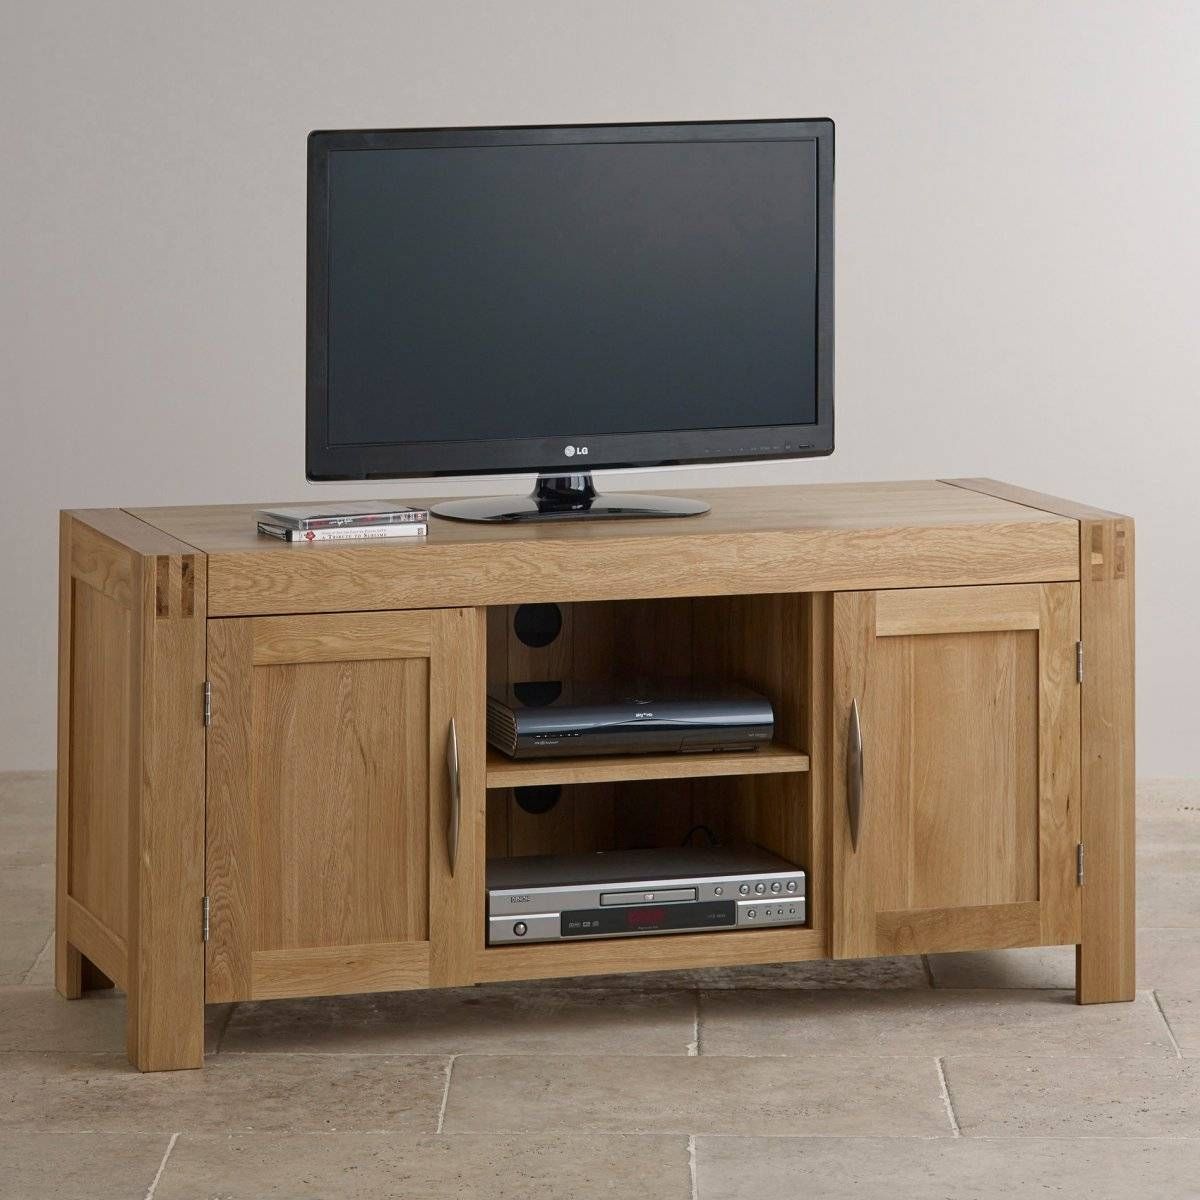 Alto Tv Cabinet In Solid Oak | Oak Furniture Land With Regard To Sideboard Tv (View 11 of 20)